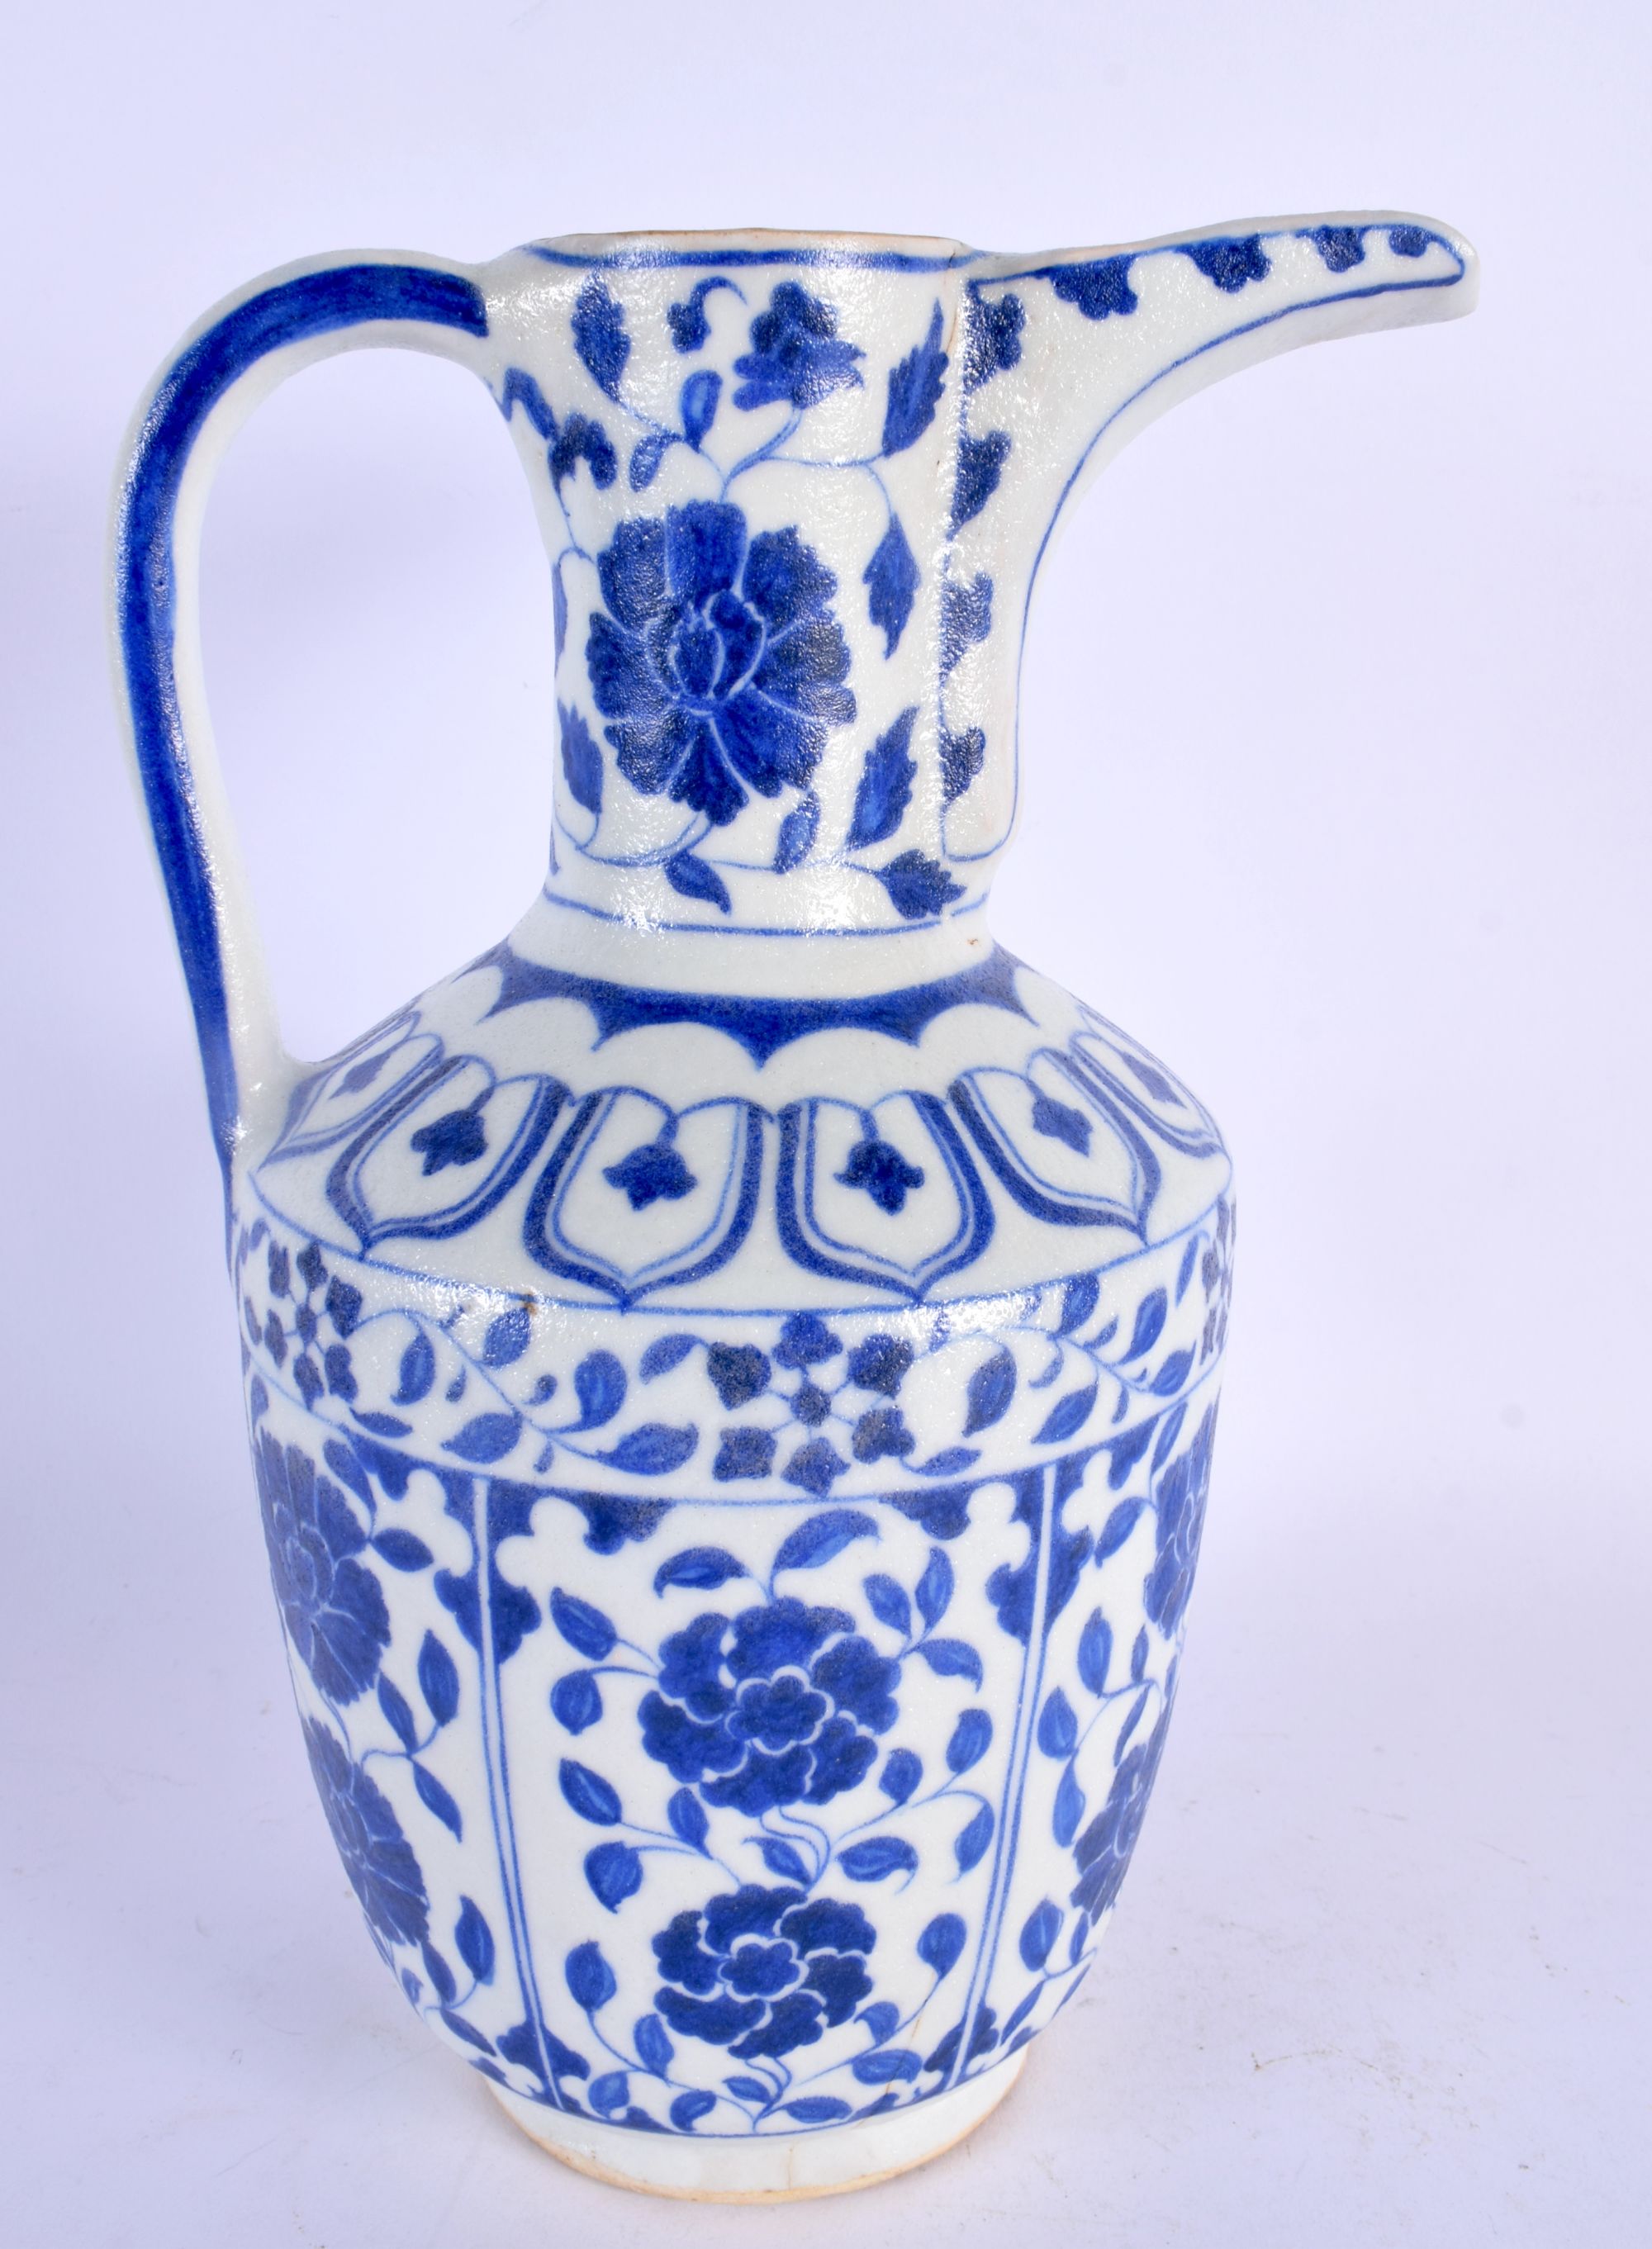 A TURKISH ISLAMIC BLUE AND WHITE WATER JUG. 27 cm high. - Image 2 of 4